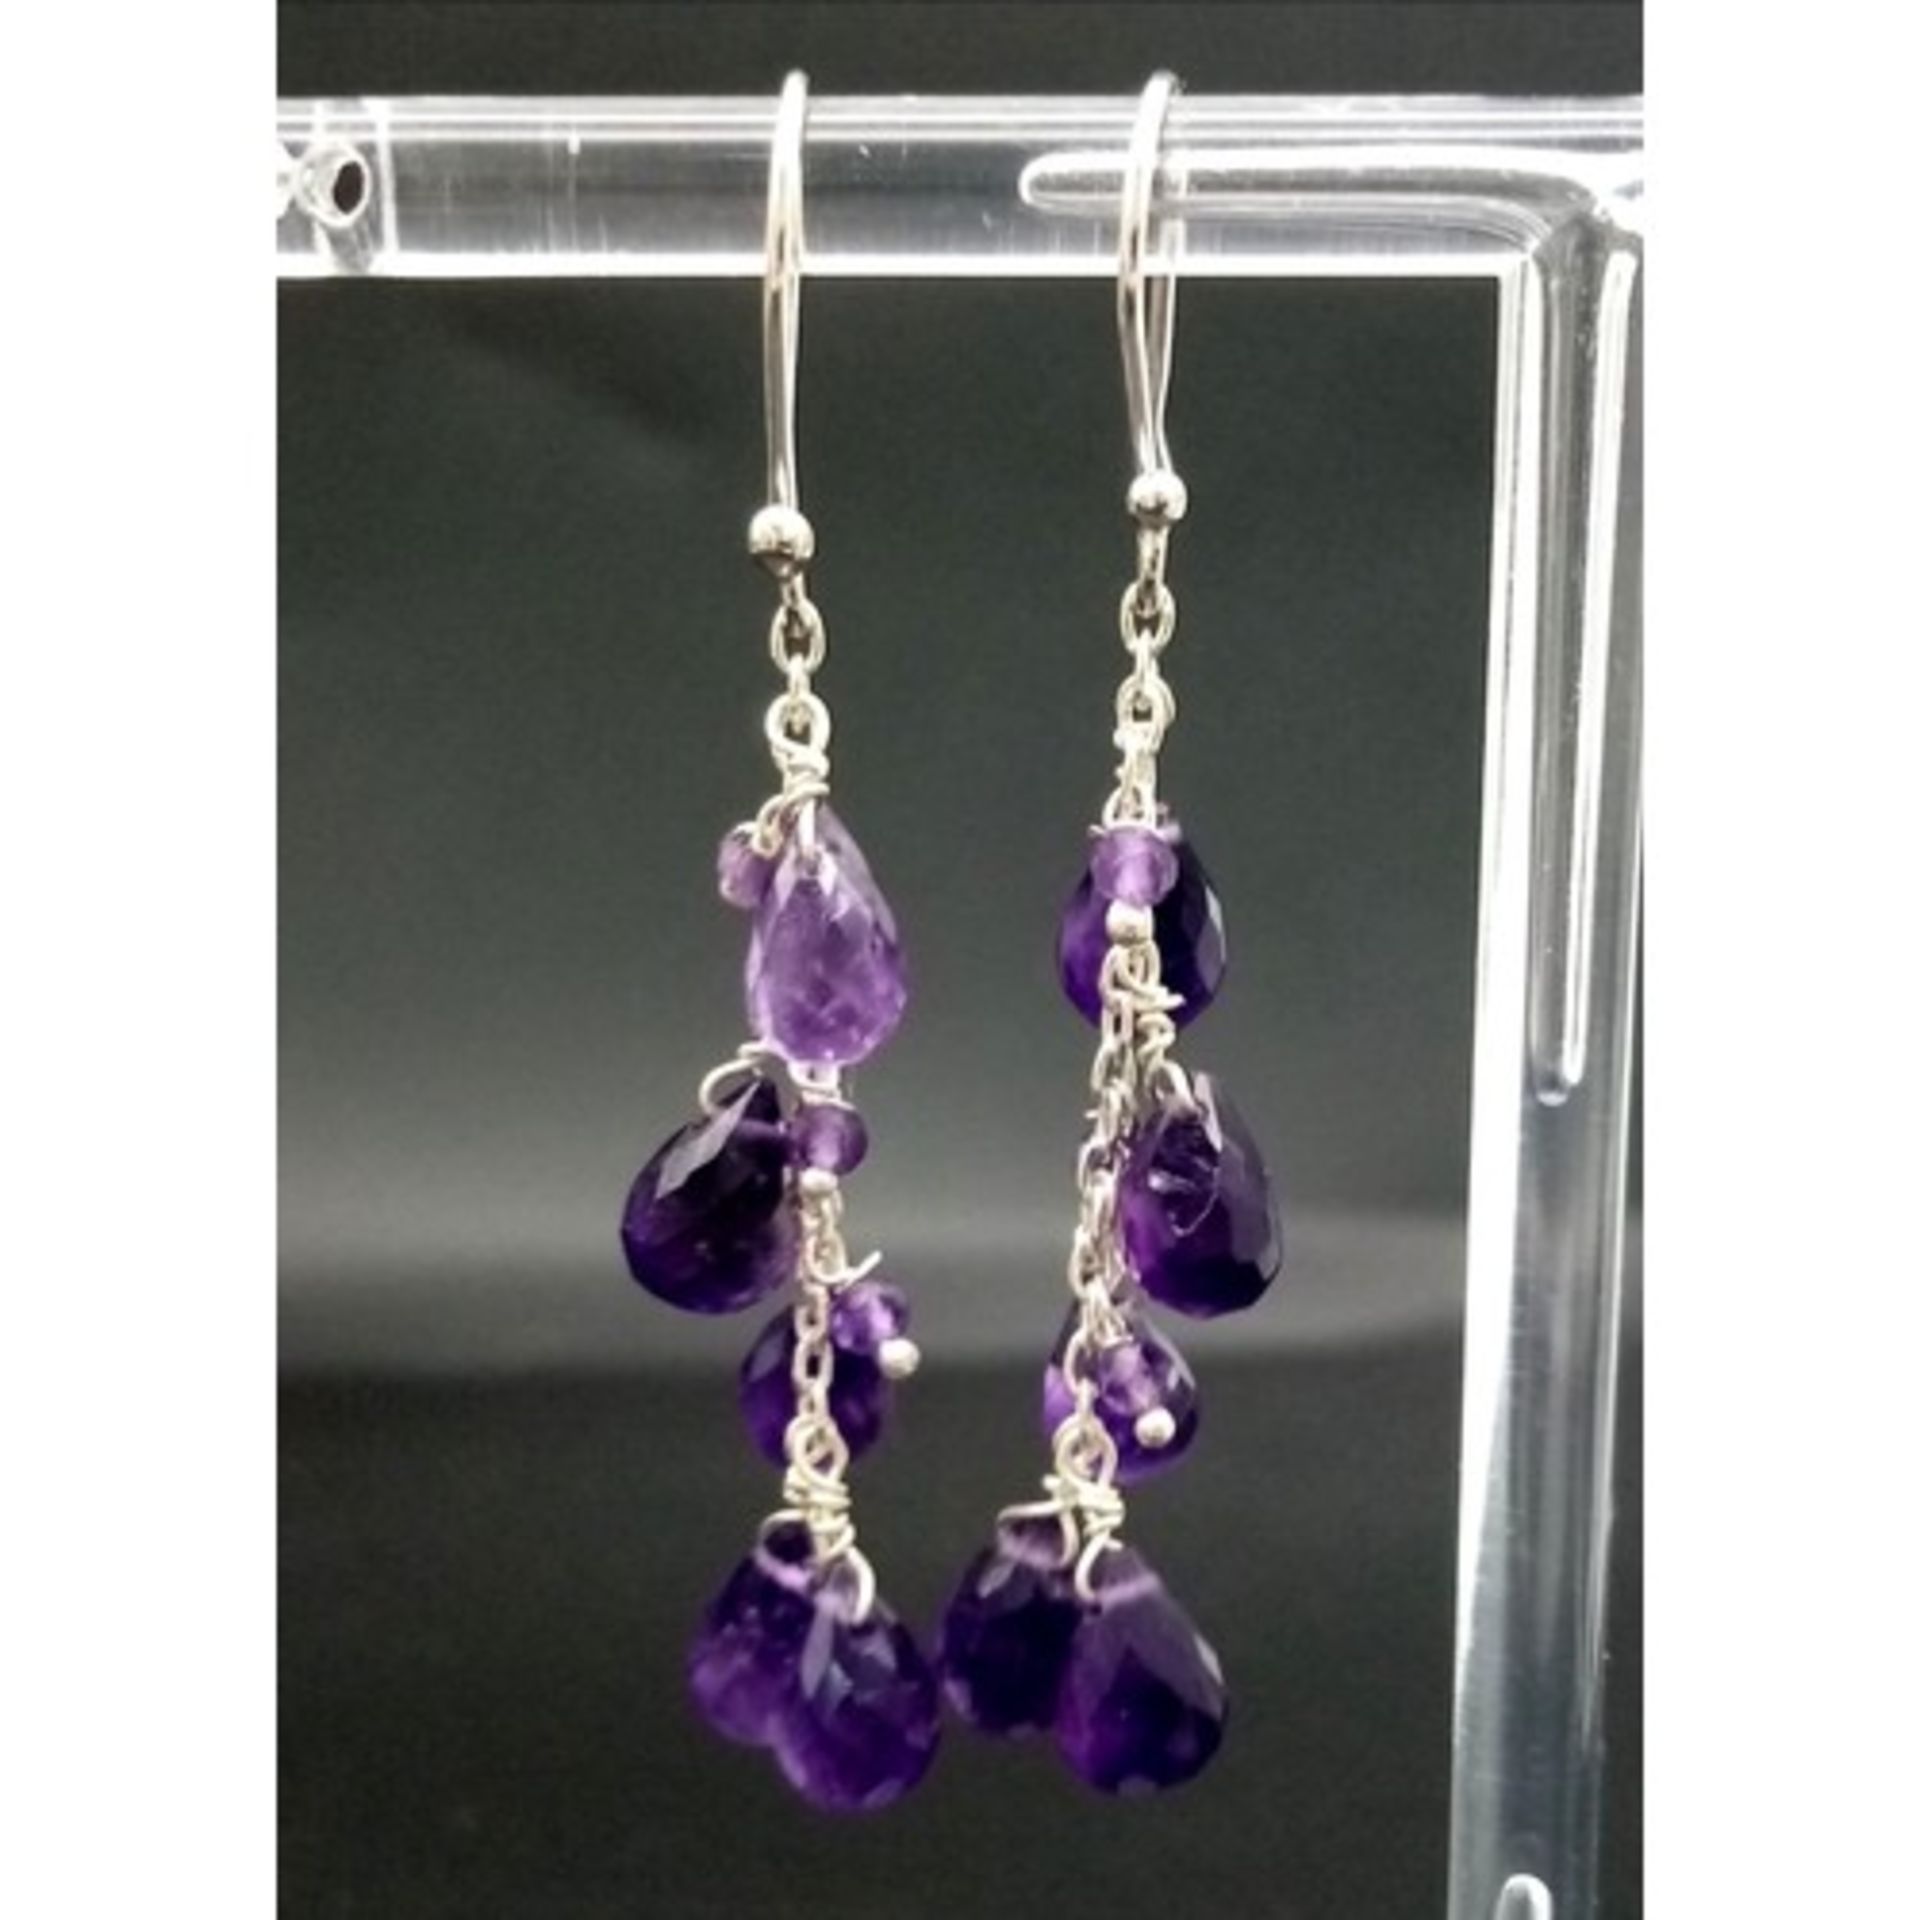 A 165ct Amethyst Gemstone Drop Necklace with a pair of amethyst drop Earrings. Necklace - 42cm - Image 5 of 5